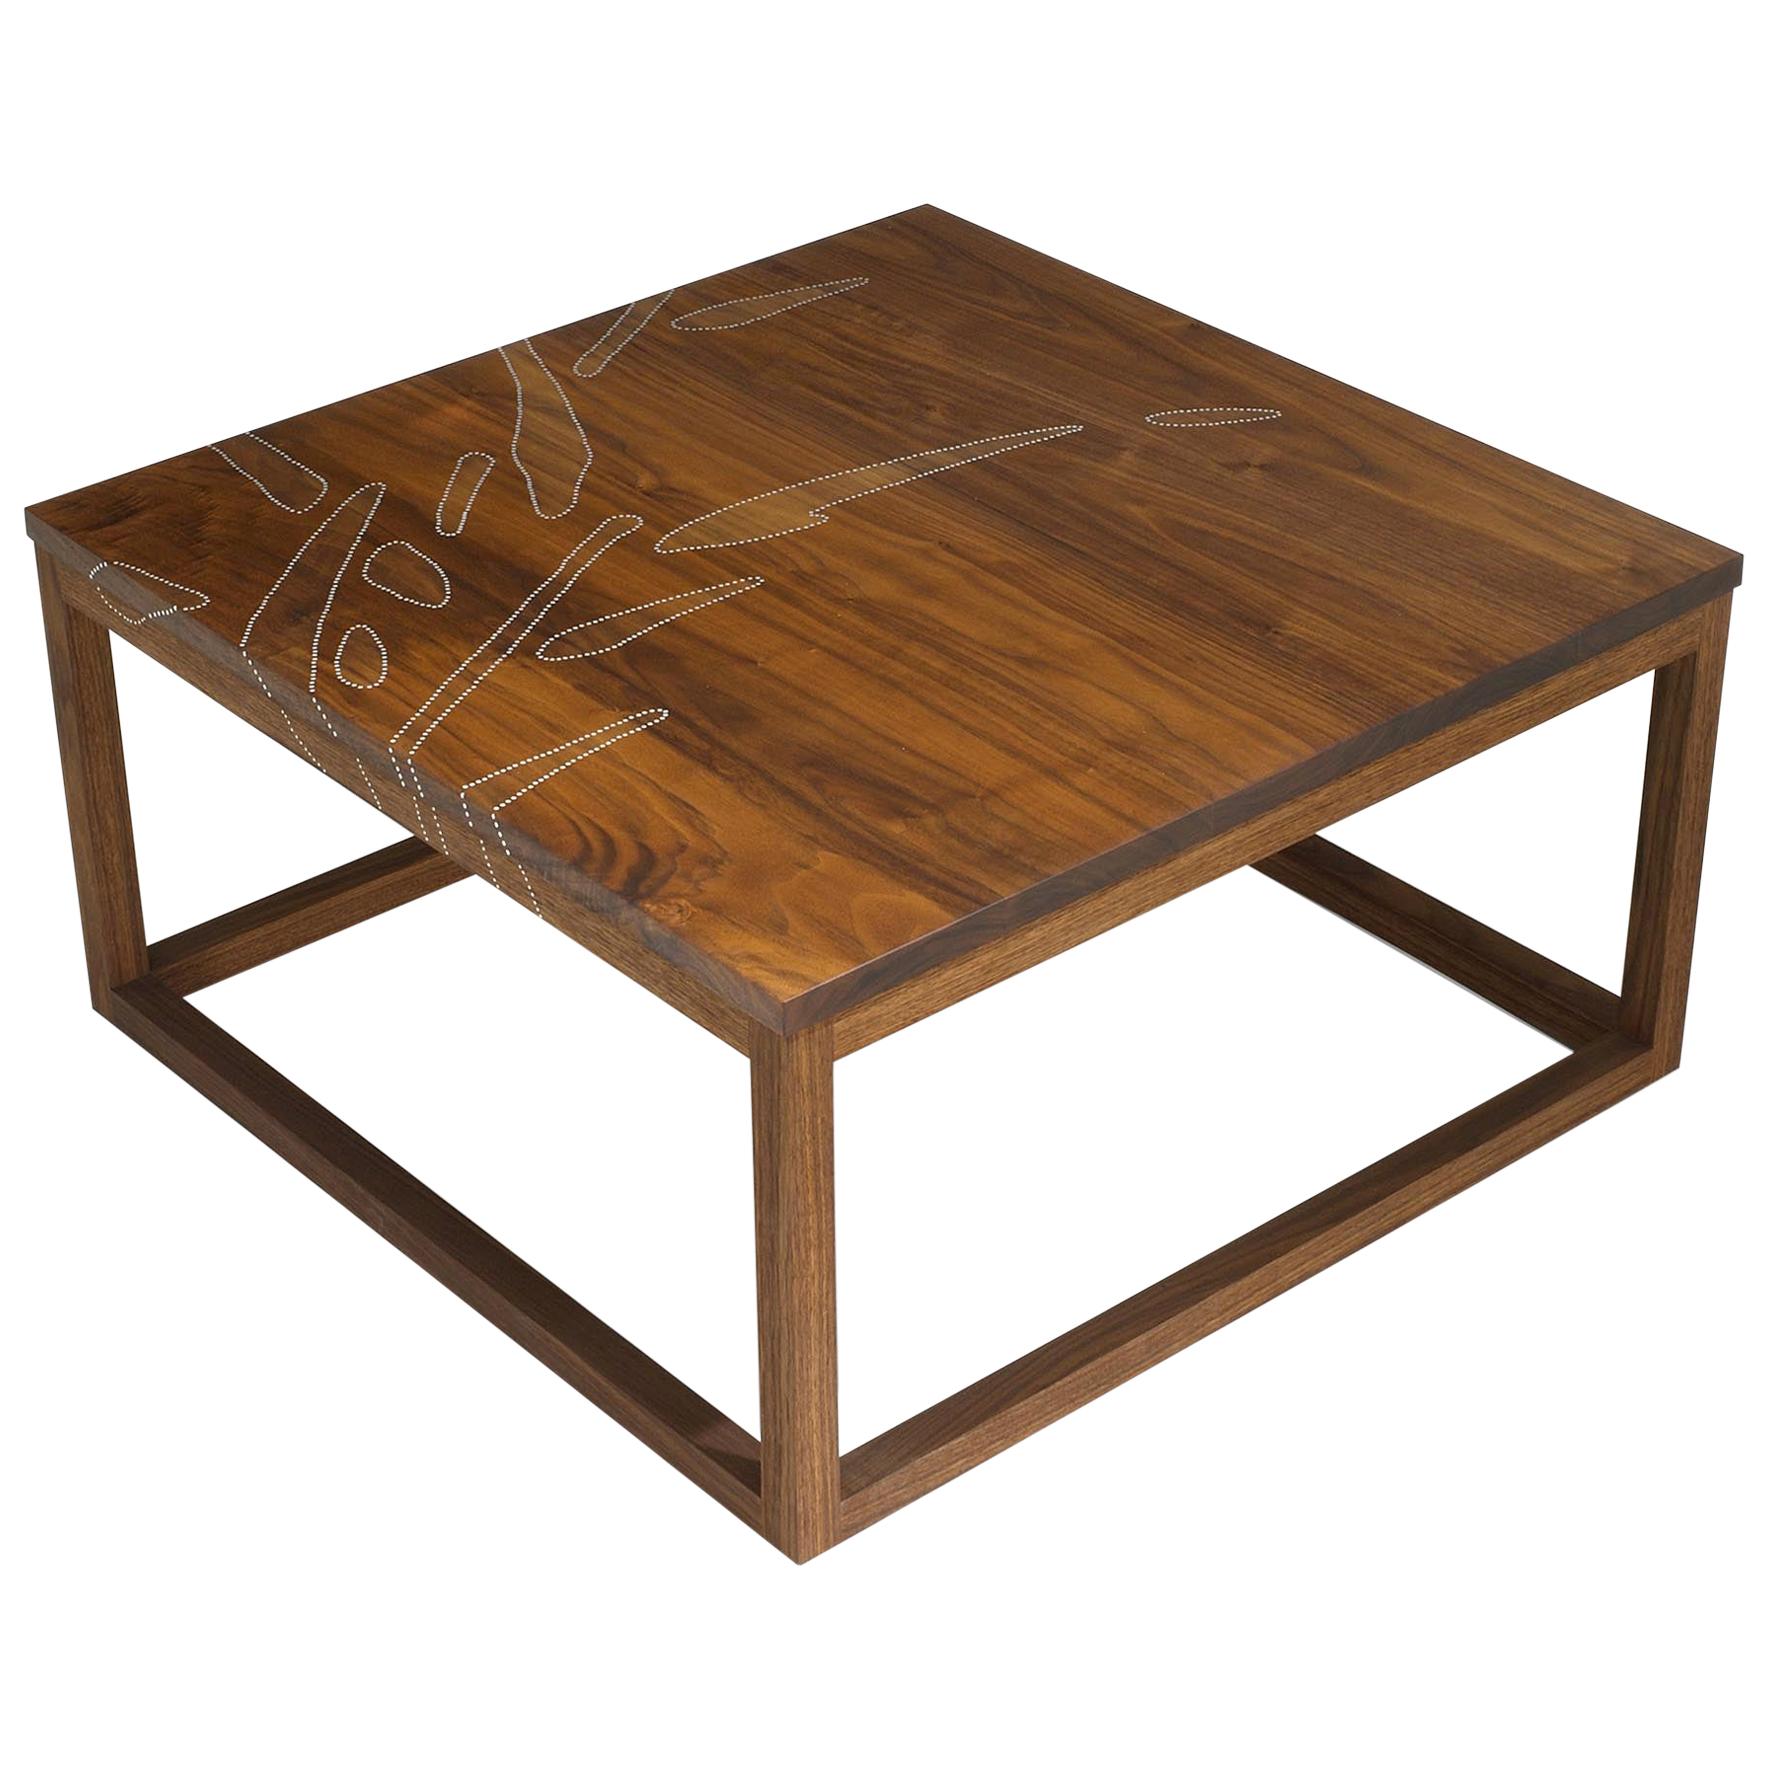 Modern Contemporary Nail Inlay Coffee Table No. 45 by Peter Sandback For Sale